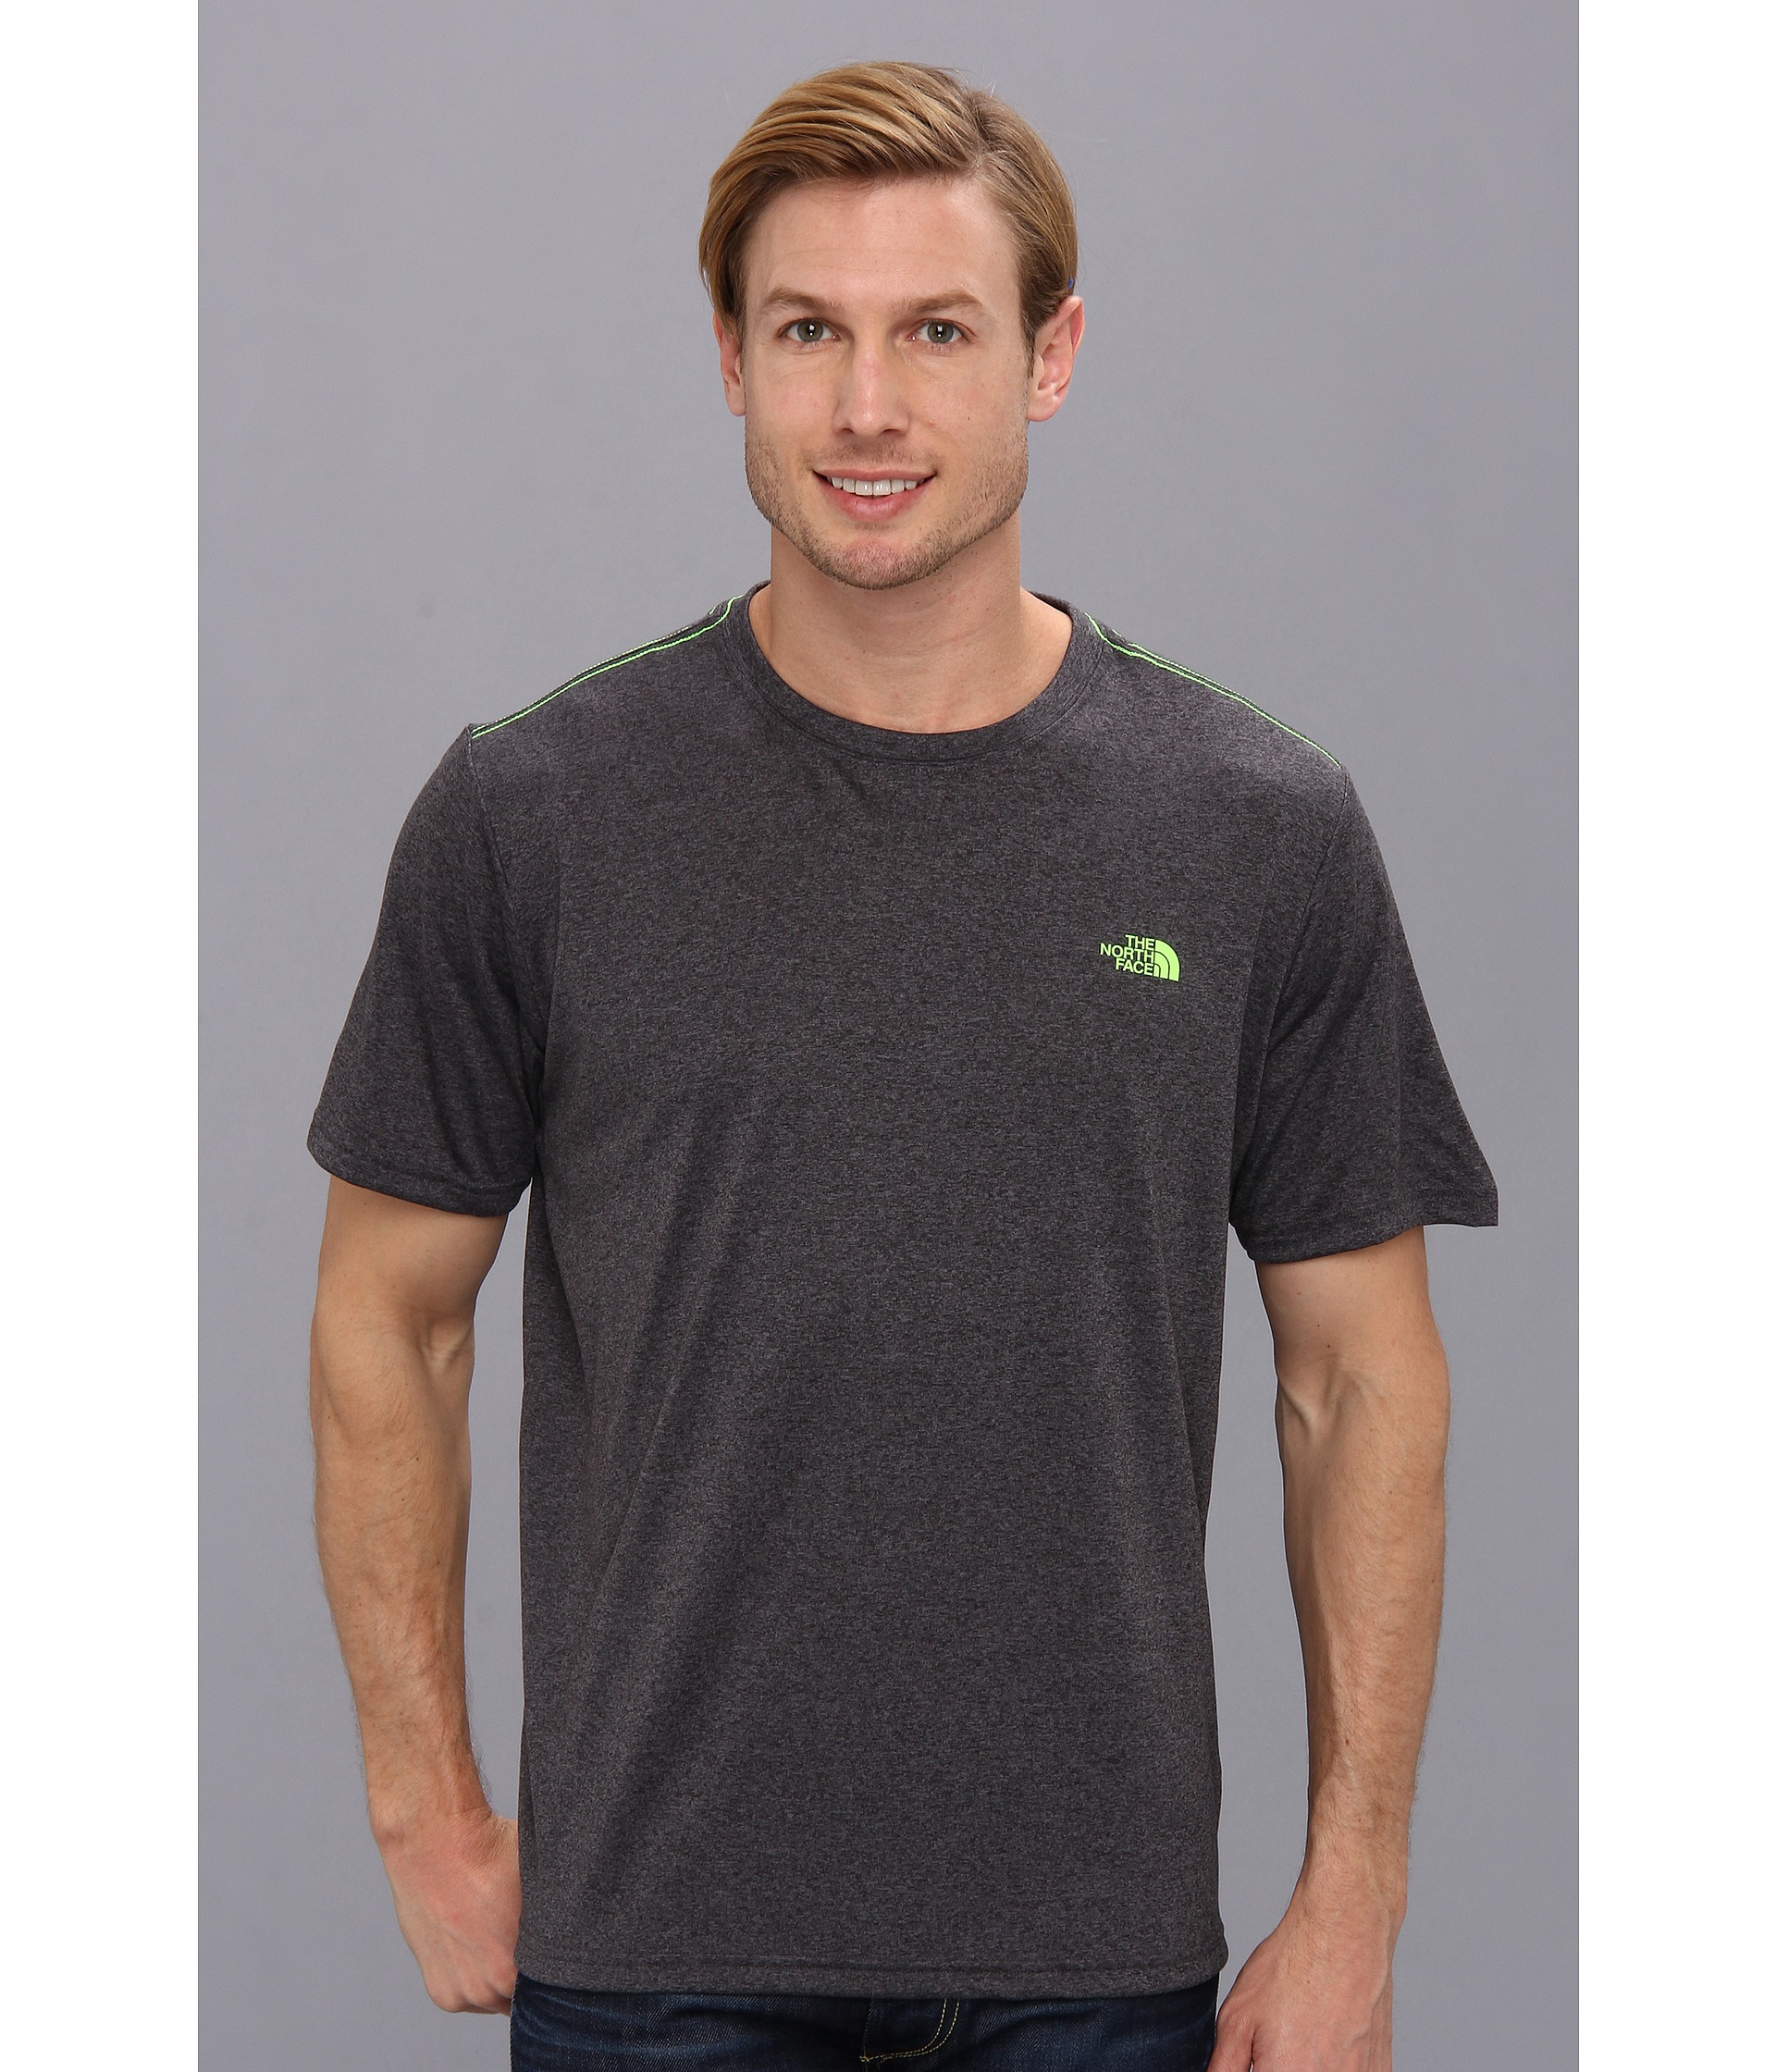 The North Face Reaxion Amp Crew Tee Flash Sales, SAVE 53%.